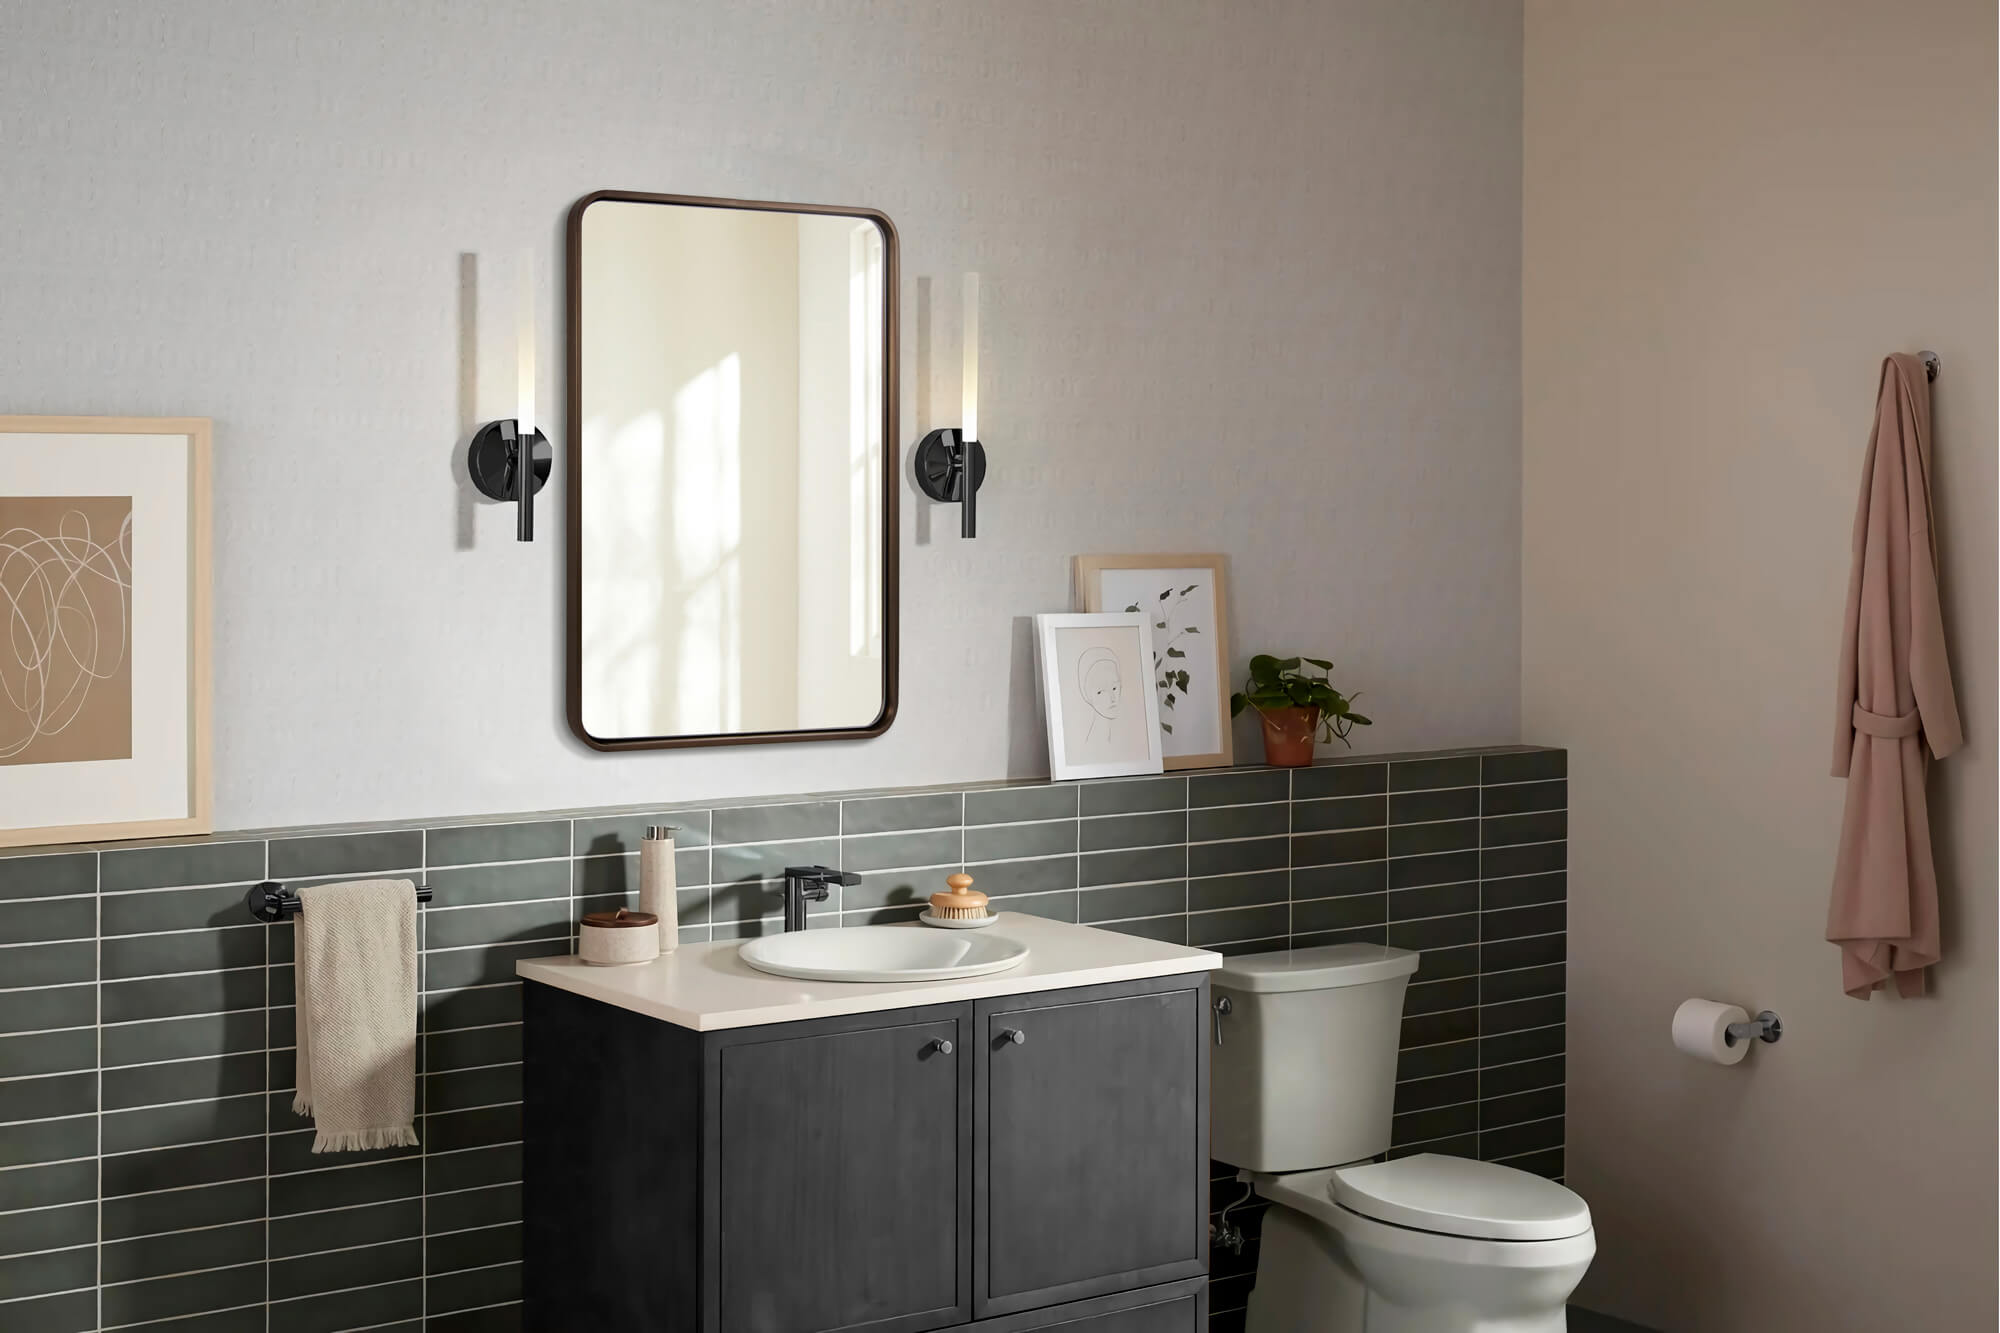 SOME EASY IDEAS YOU CAN USE TO REMODEL YOUR BATHROOM ON A BUDGET